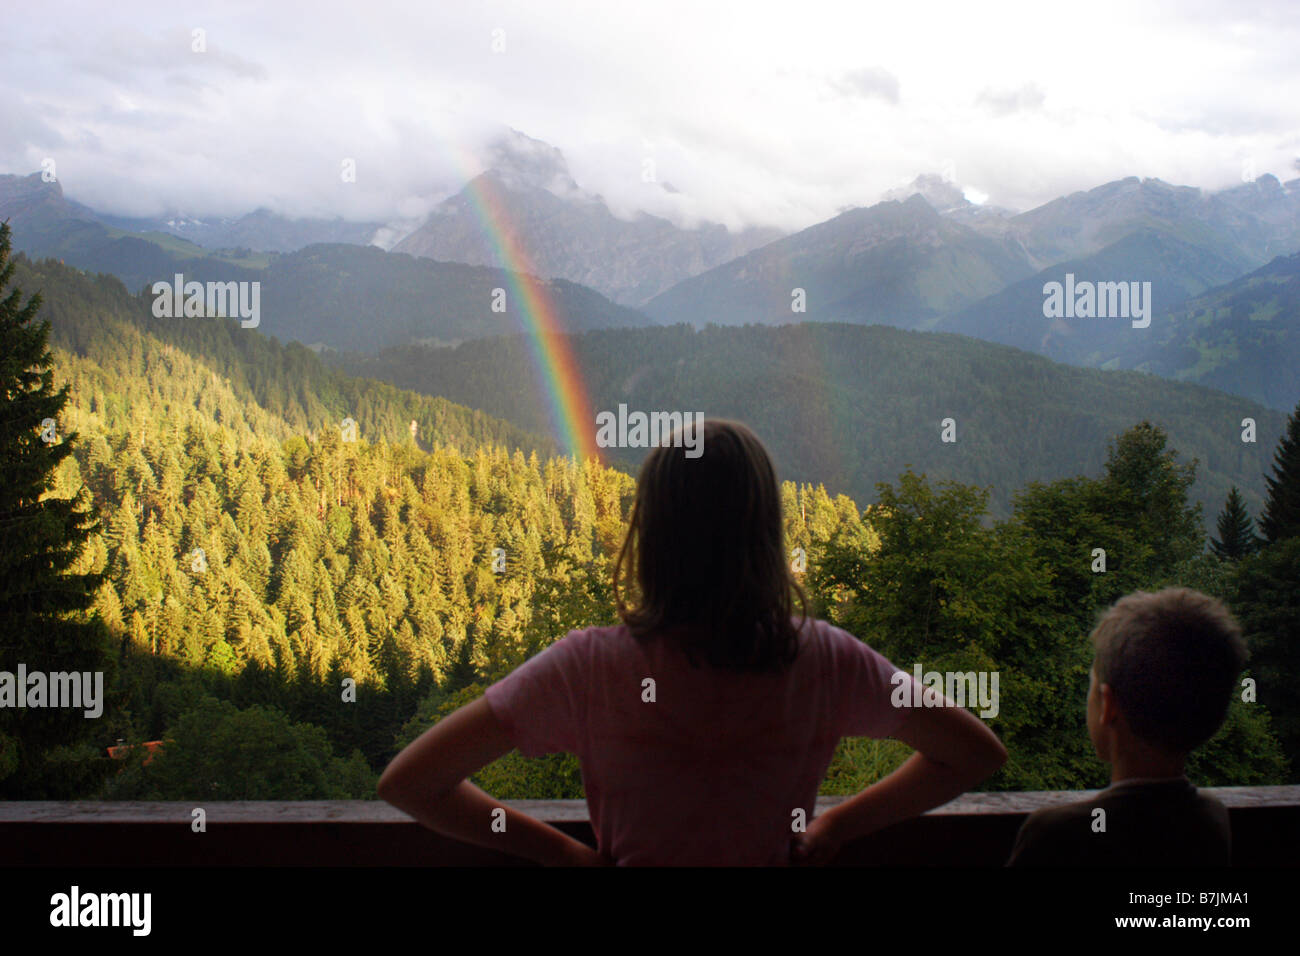 Two children look out of a swiss holiday chalet in Switzerland onto a rainbow and mountains Stock Photo